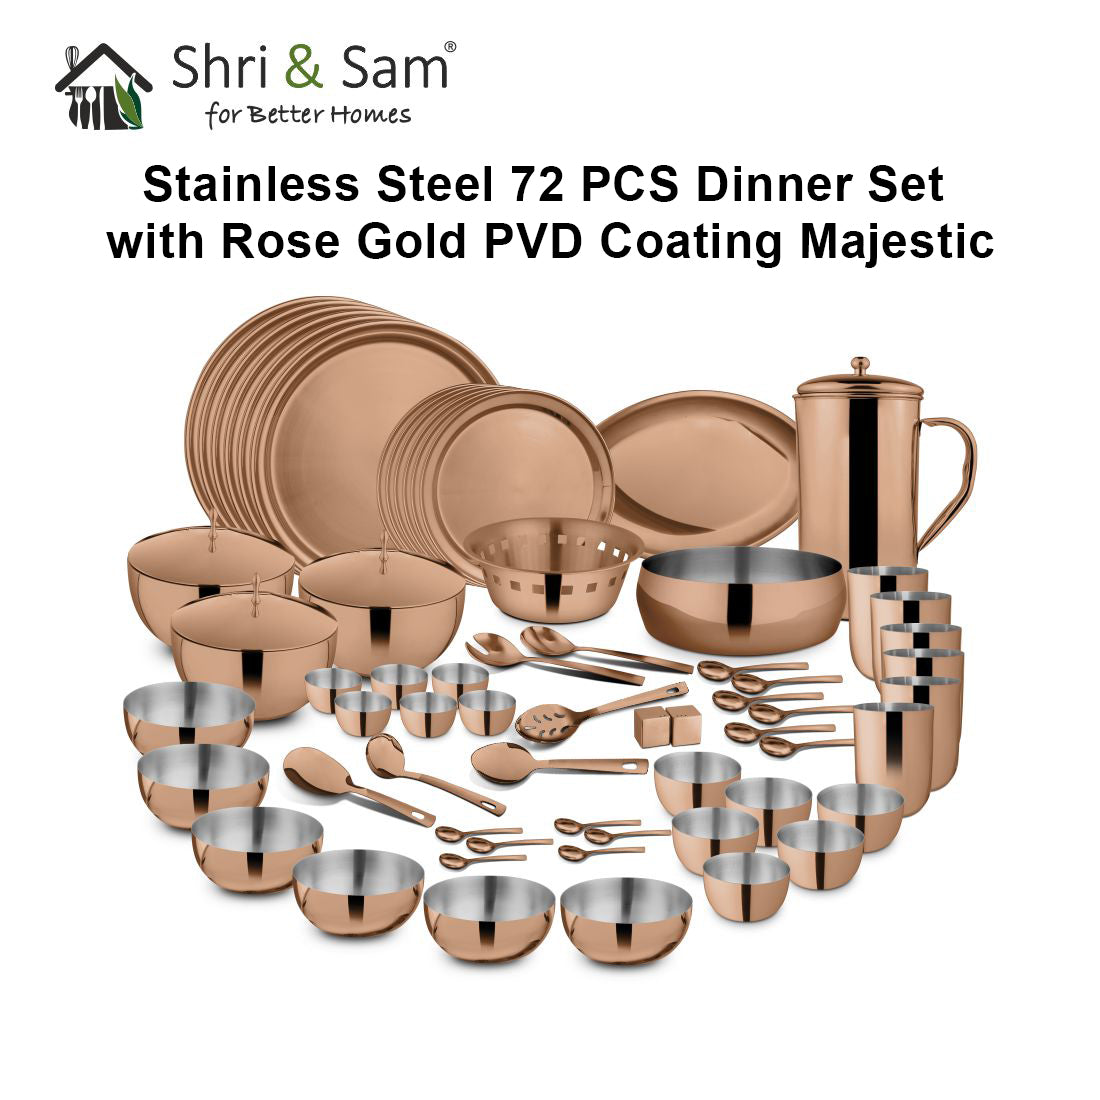 Stainless Steel 72 PCS Dinner Set (6 People) with Rose Gold PVD Coating Majestic